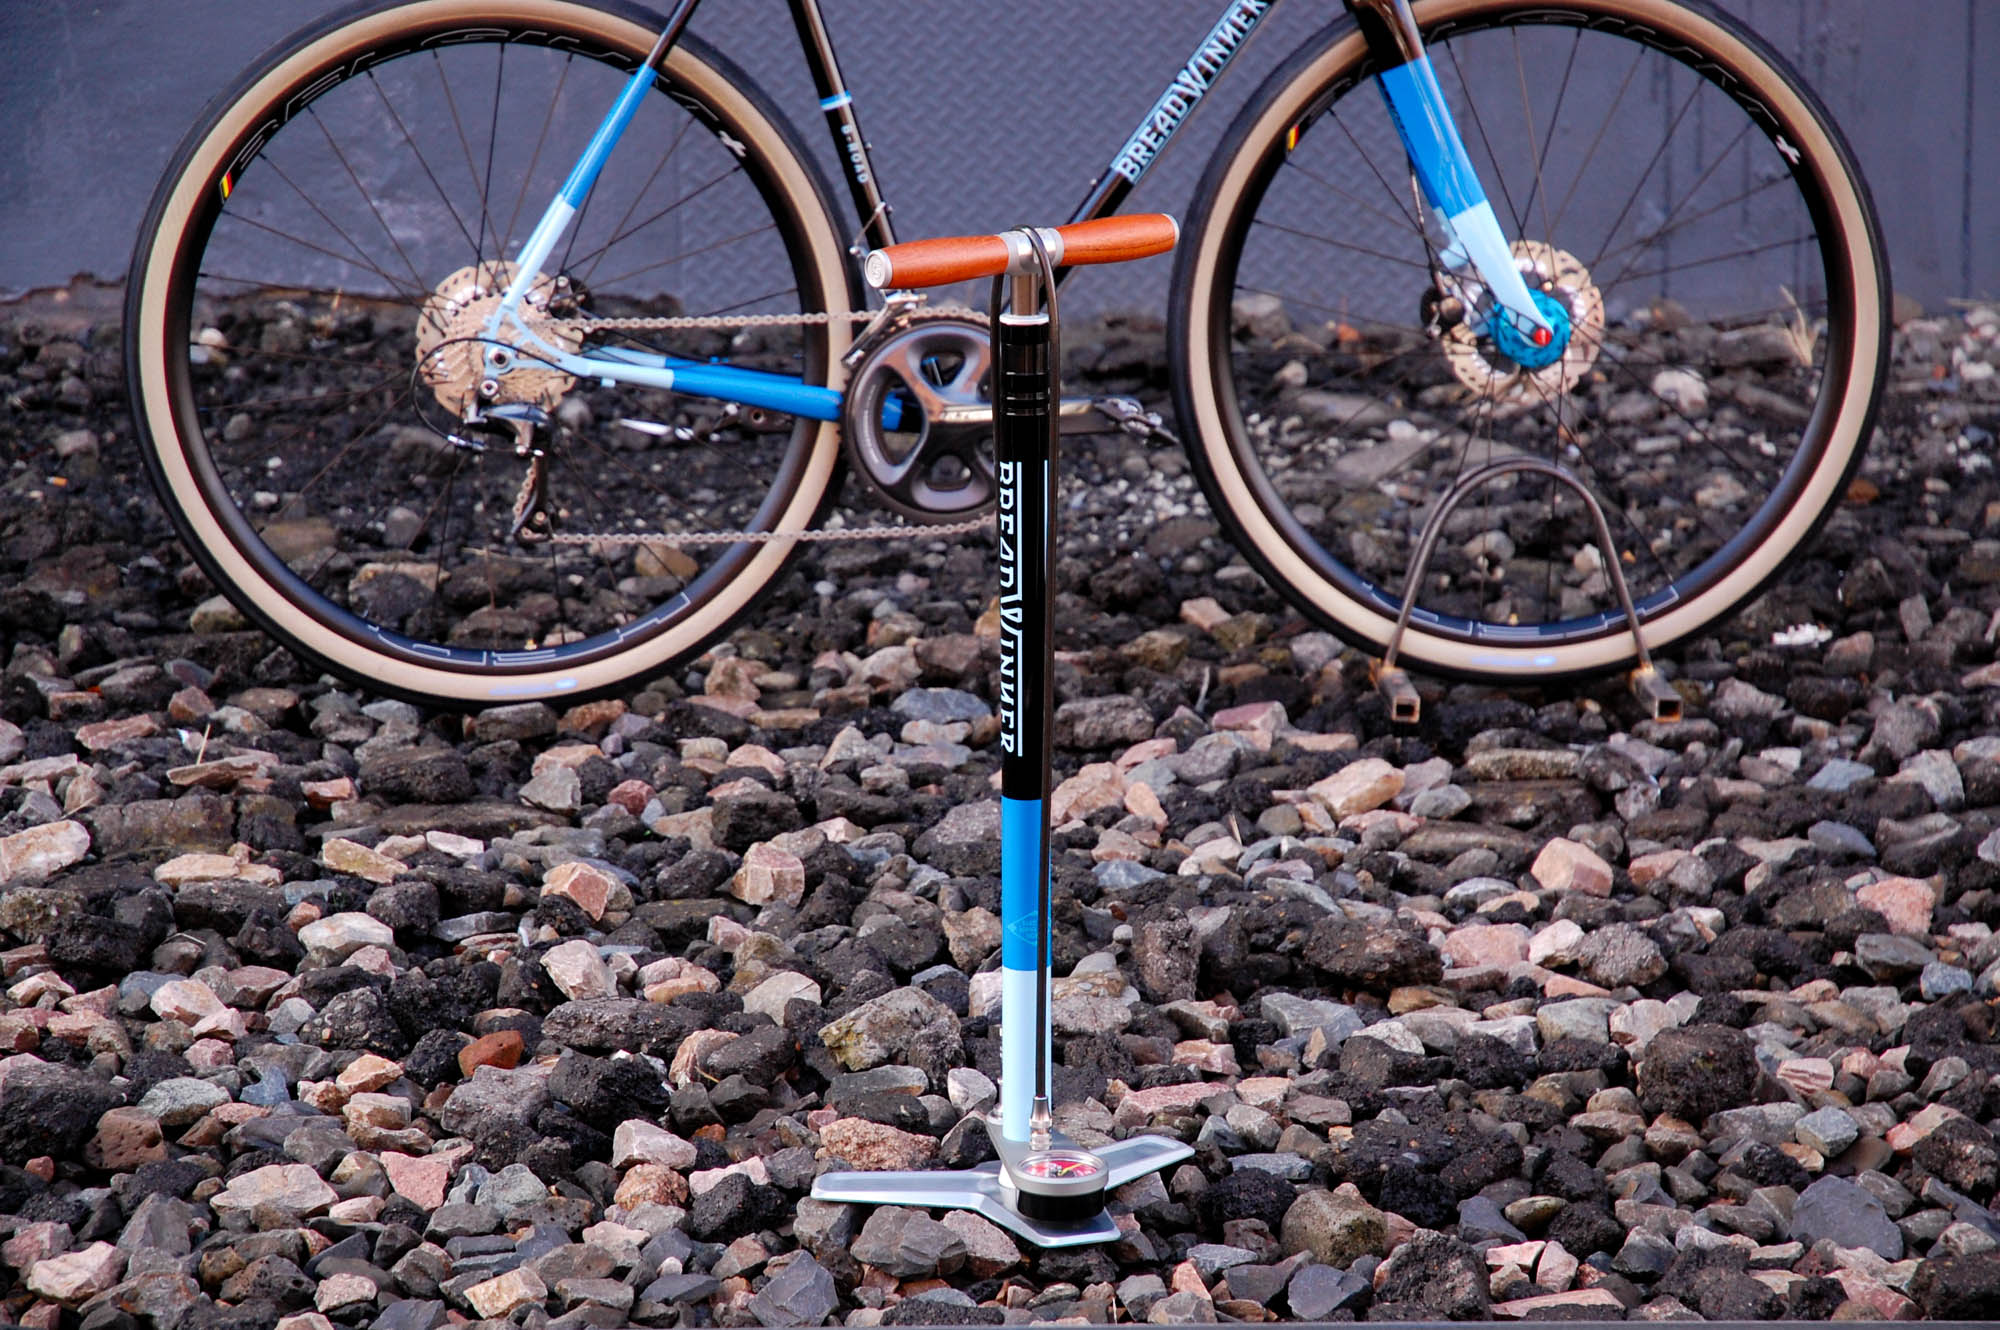 Silca Super Pista floor pump rounds out the ultimate package. (+$579)